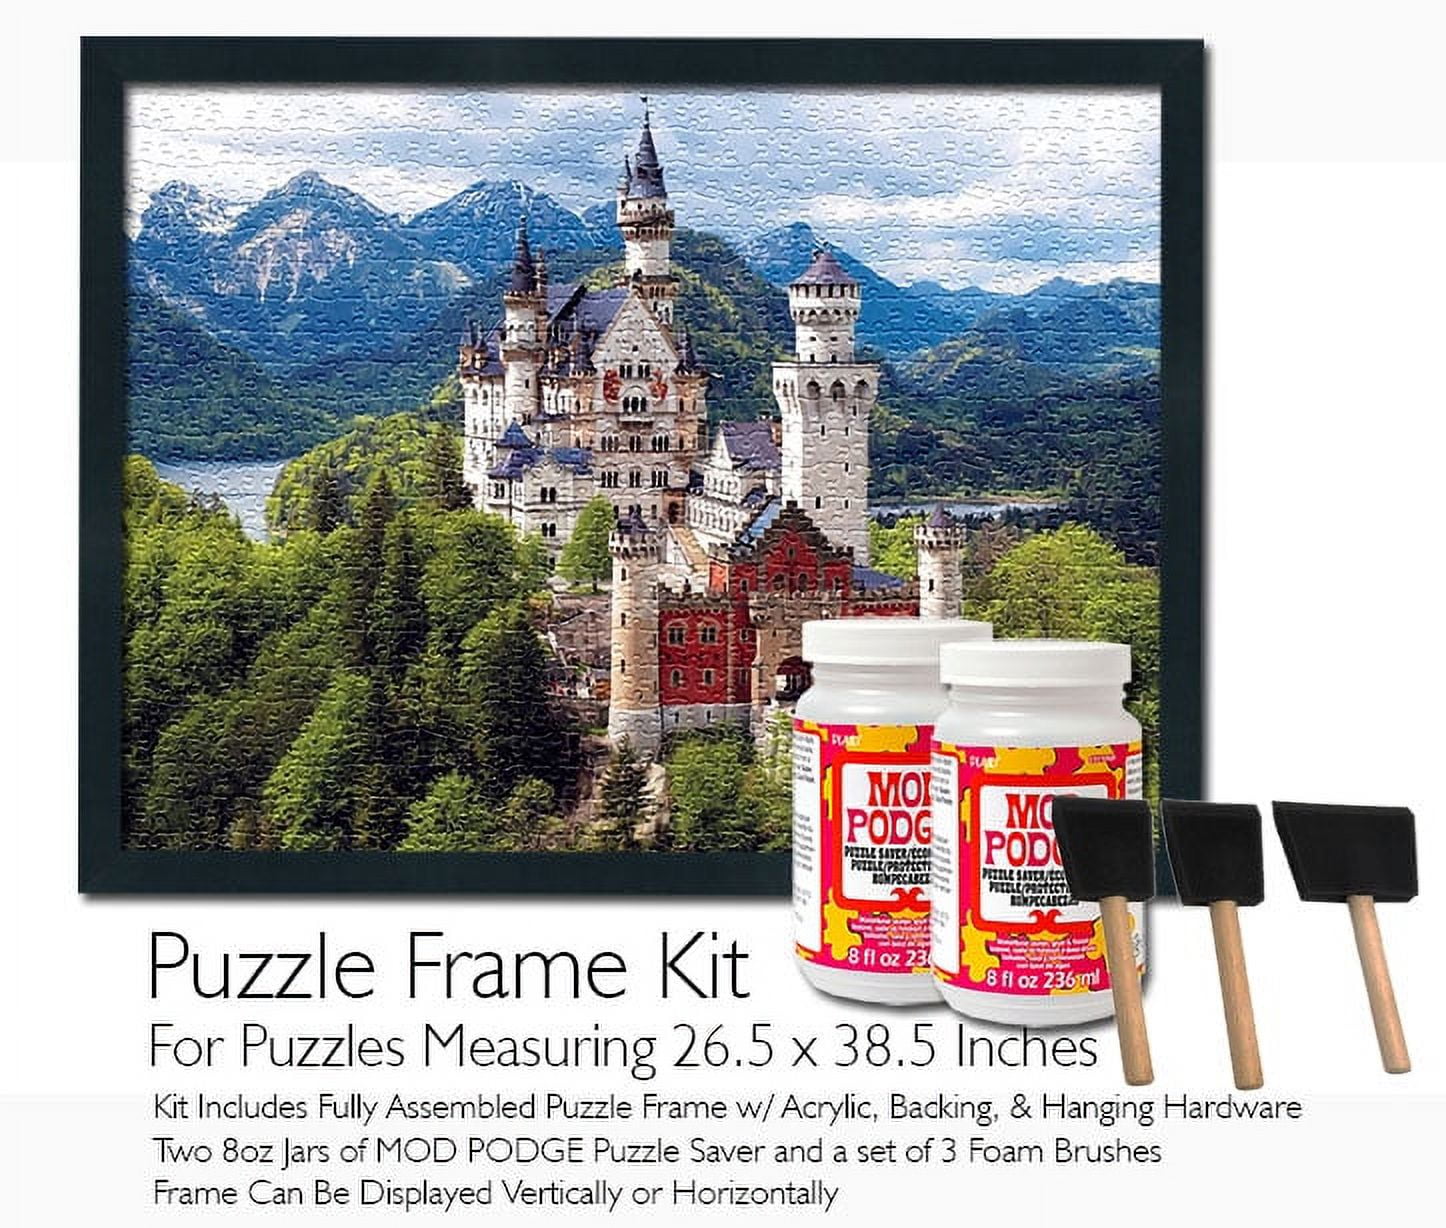 Preserve your puzzles with Mod Podge Puzzle Saver